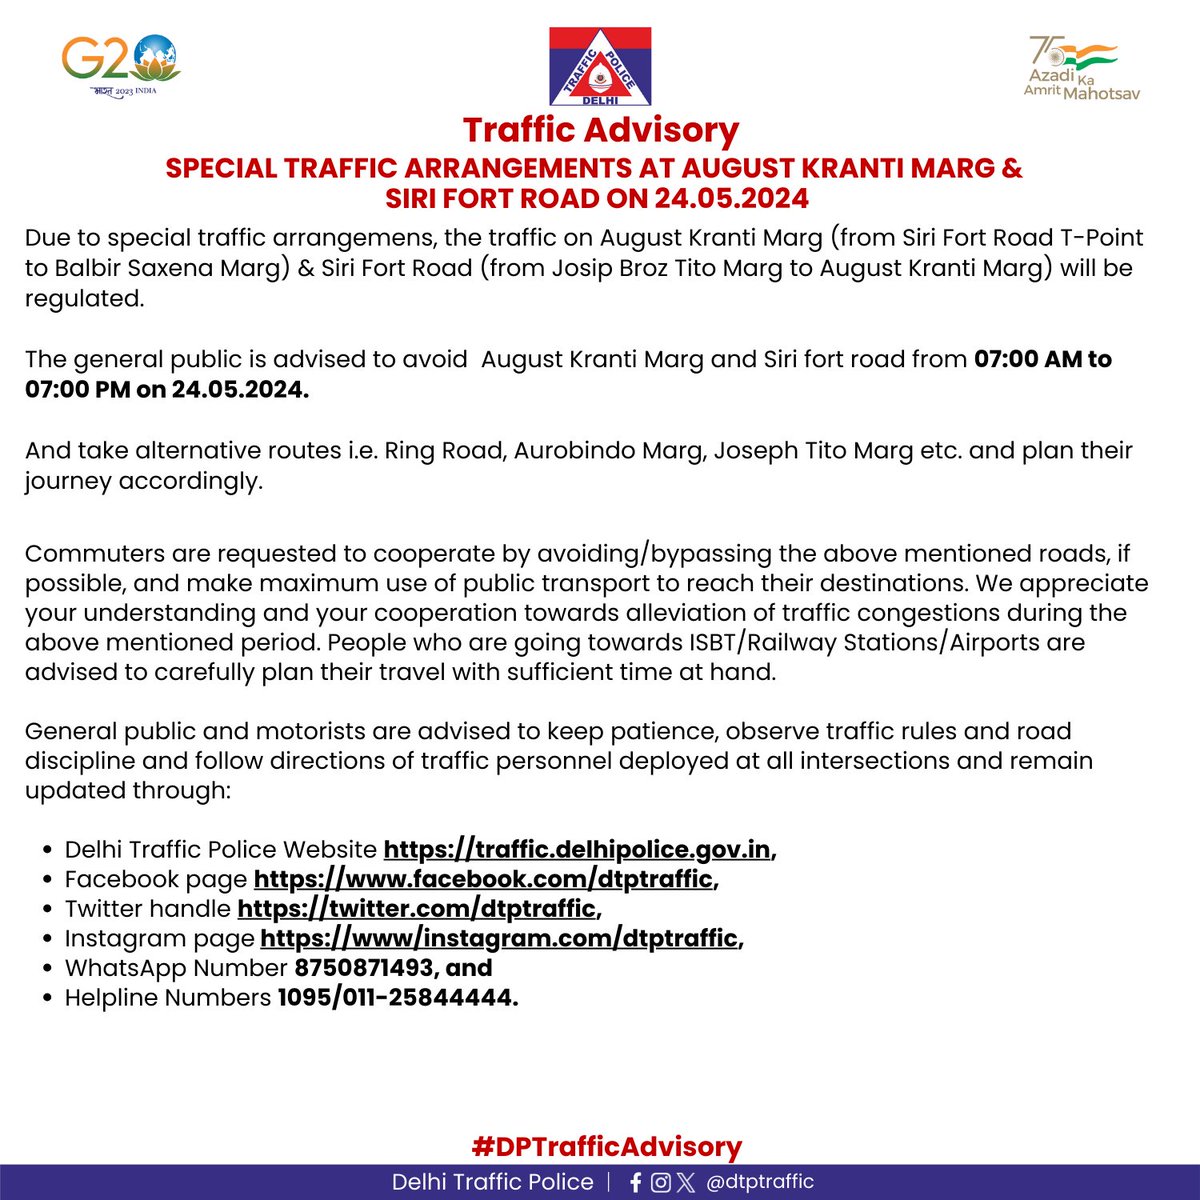 Traffic Advisory Special traffic arrangements will be effective at August Kranti Marg (from Siri Fort Road T-Point to Balbir Saxena Marg) & Siri Fort Road (from Josip Broz Tito Marg to August Kranti Marg) on 24.05.2024. Kindly follow the advisory. #DPTrafficAdvisory